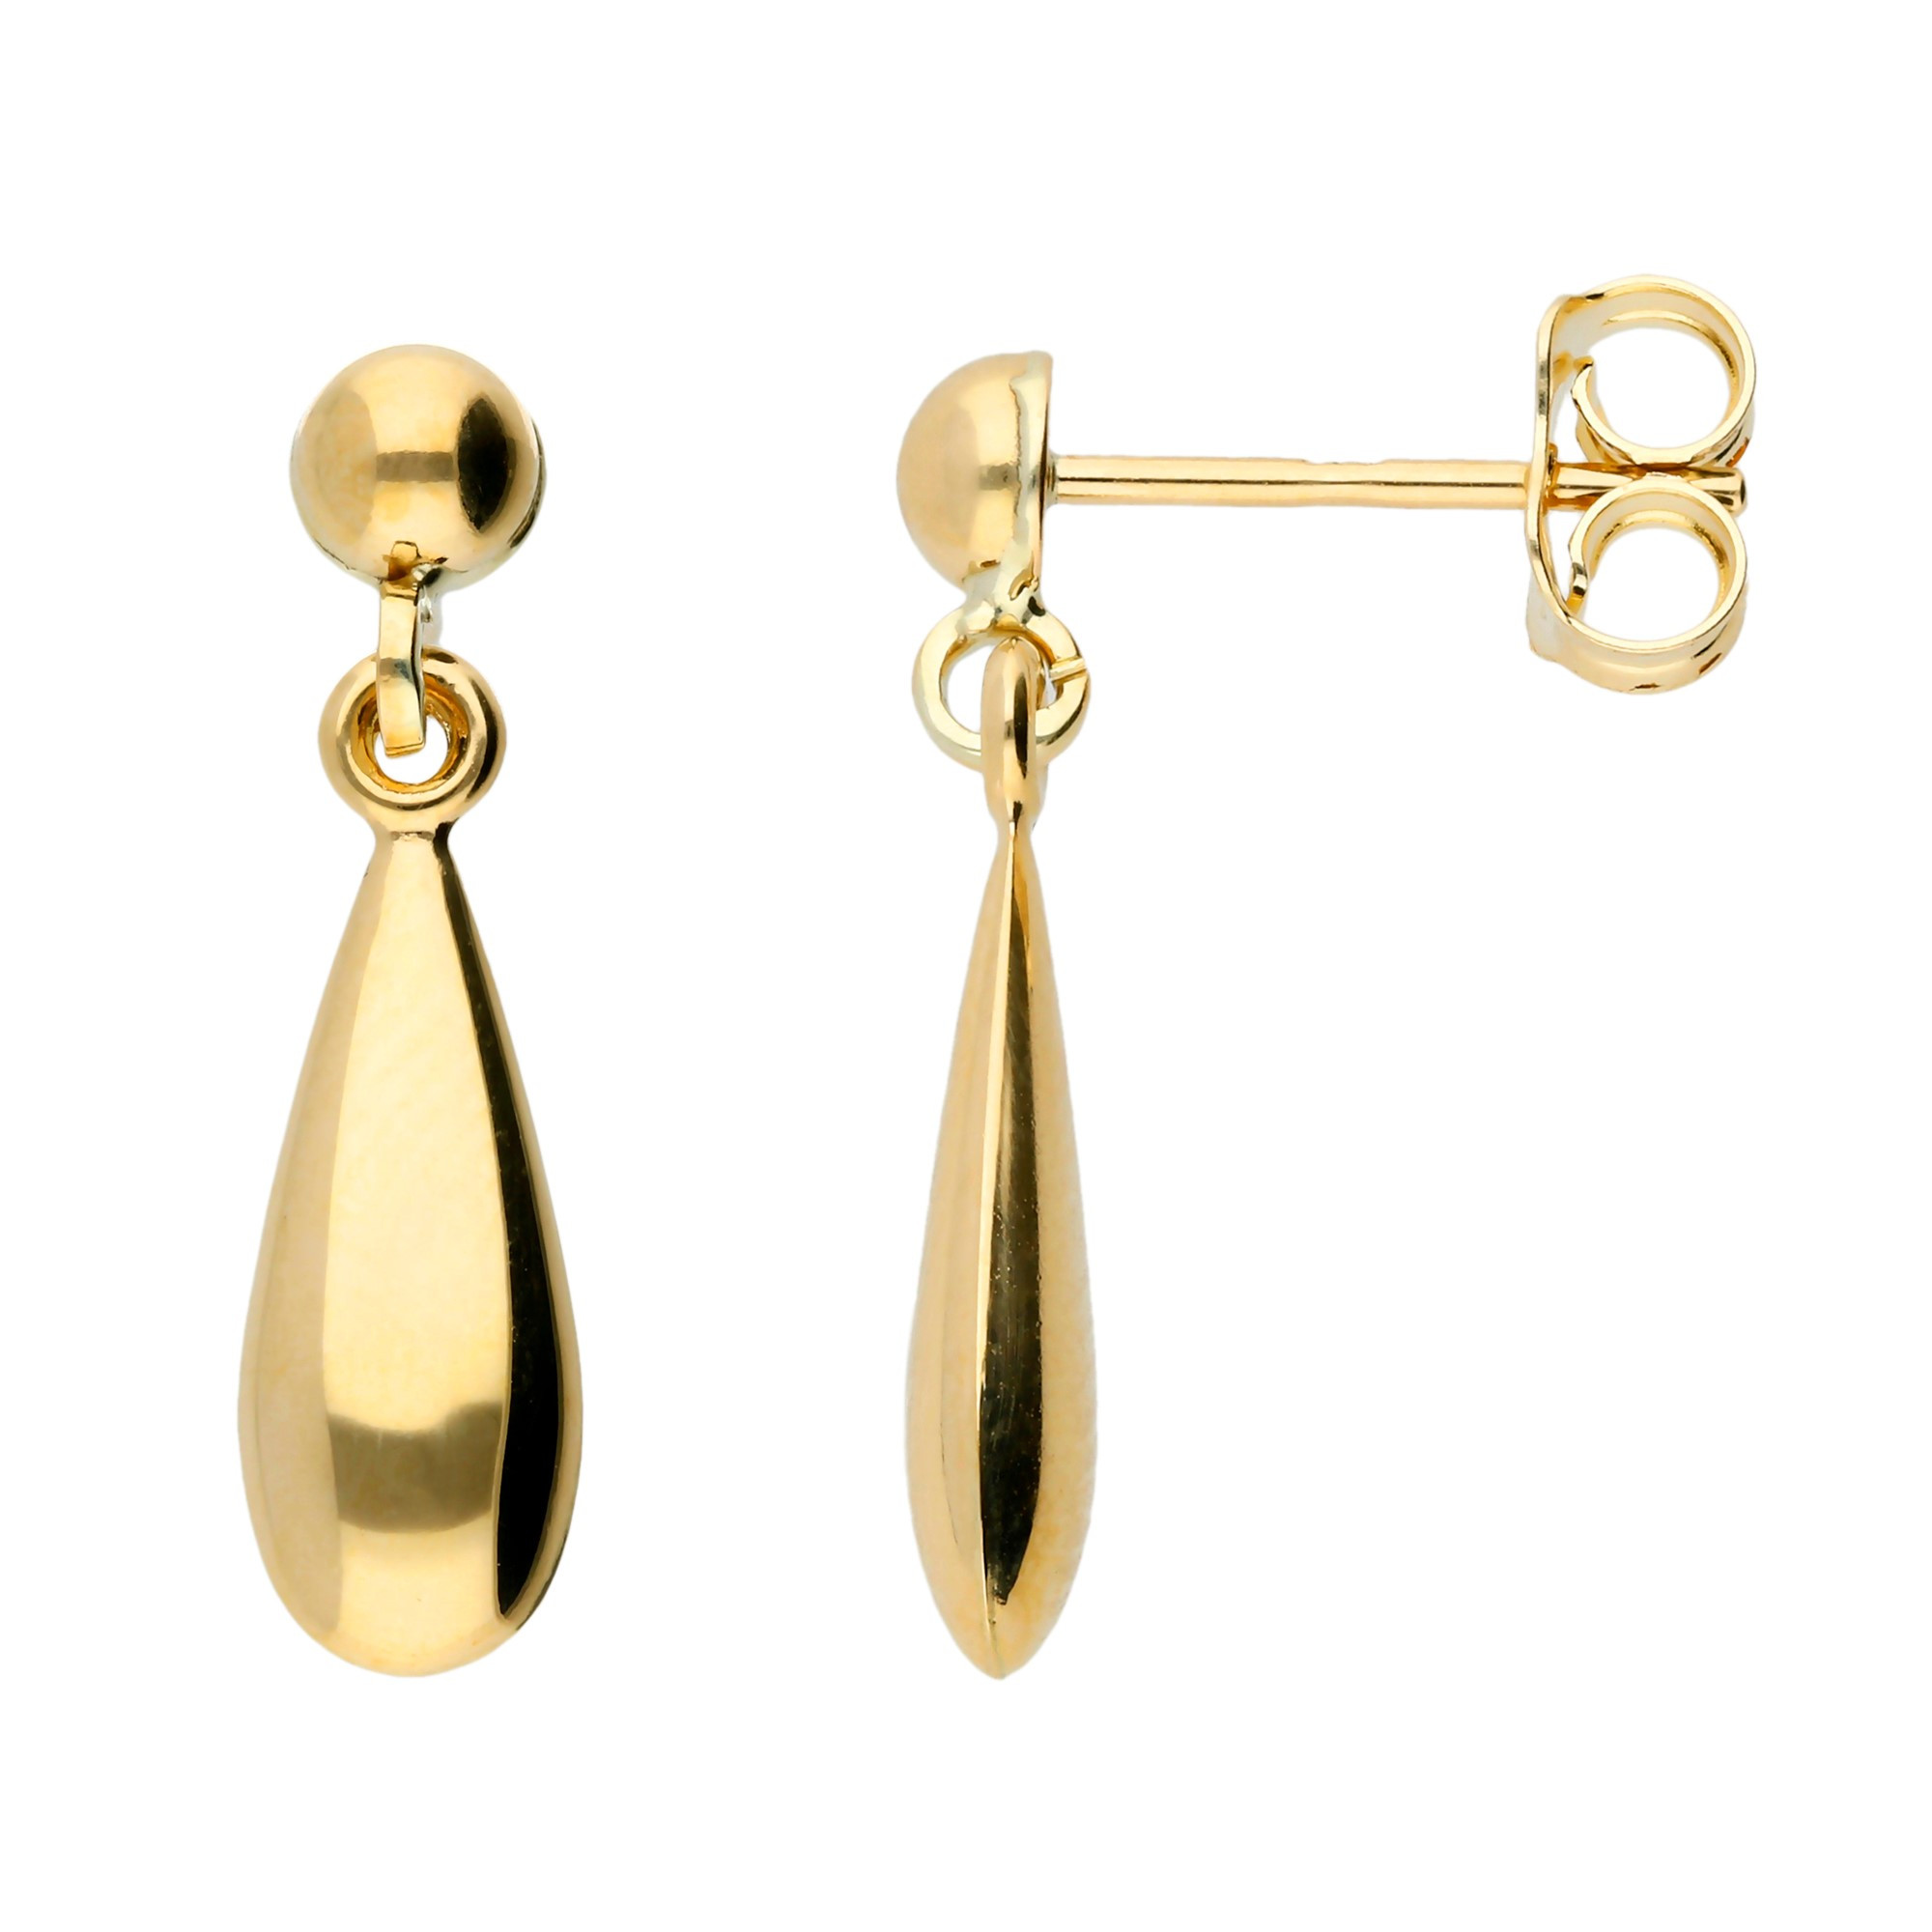 9ct Yellow Gold Drop Earrings Buy Online Free Insured Uk Delivery